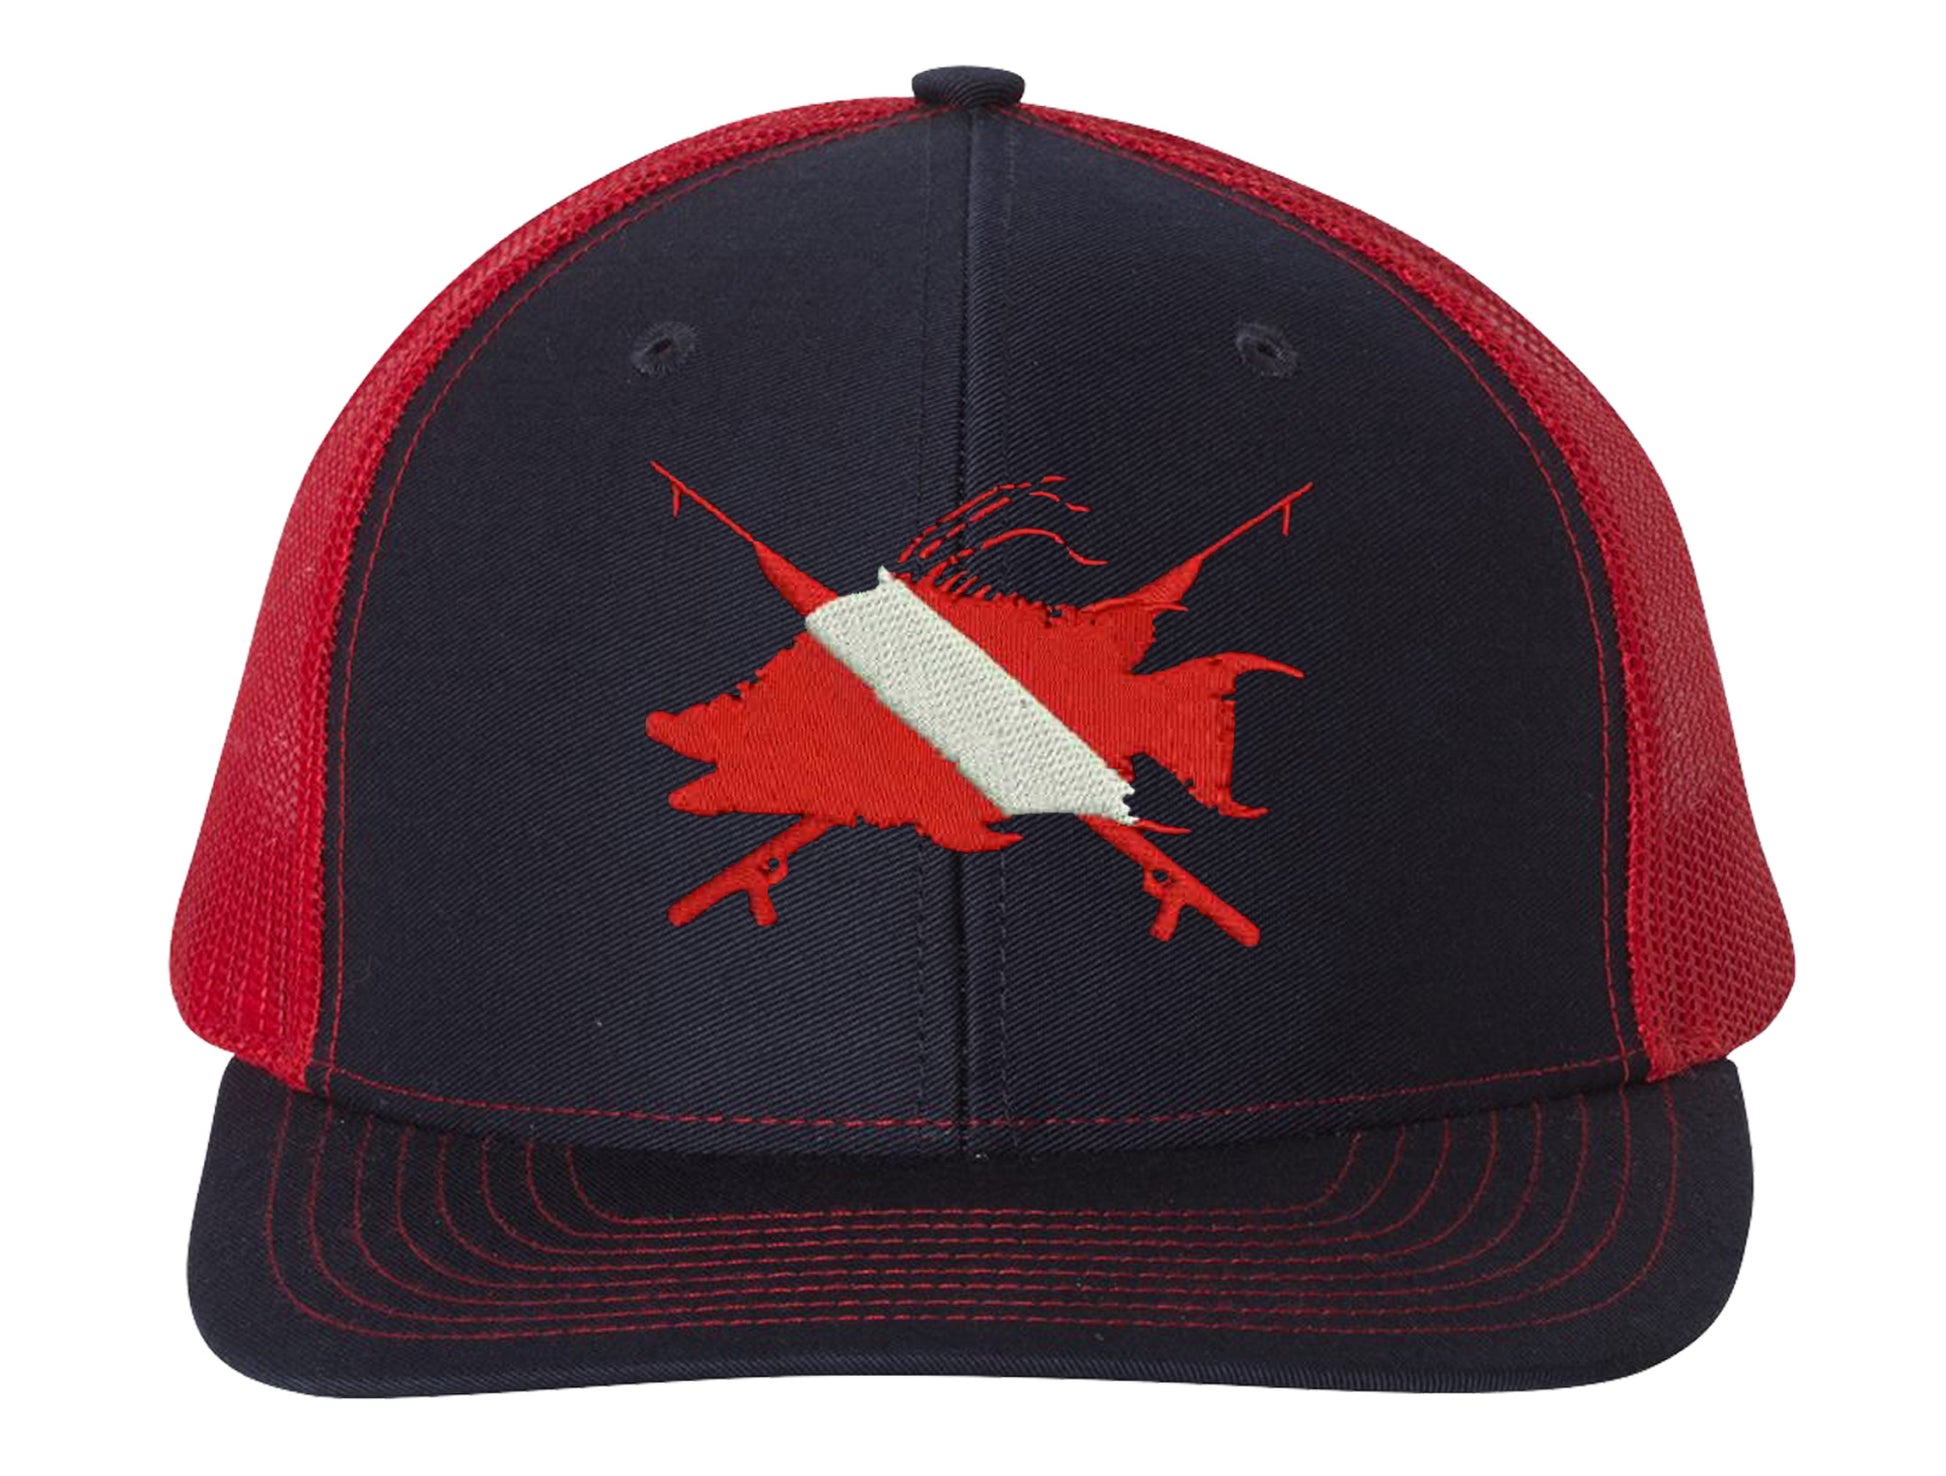 Hogfish Dive Spears Structured Navy/Red Trucker Hat